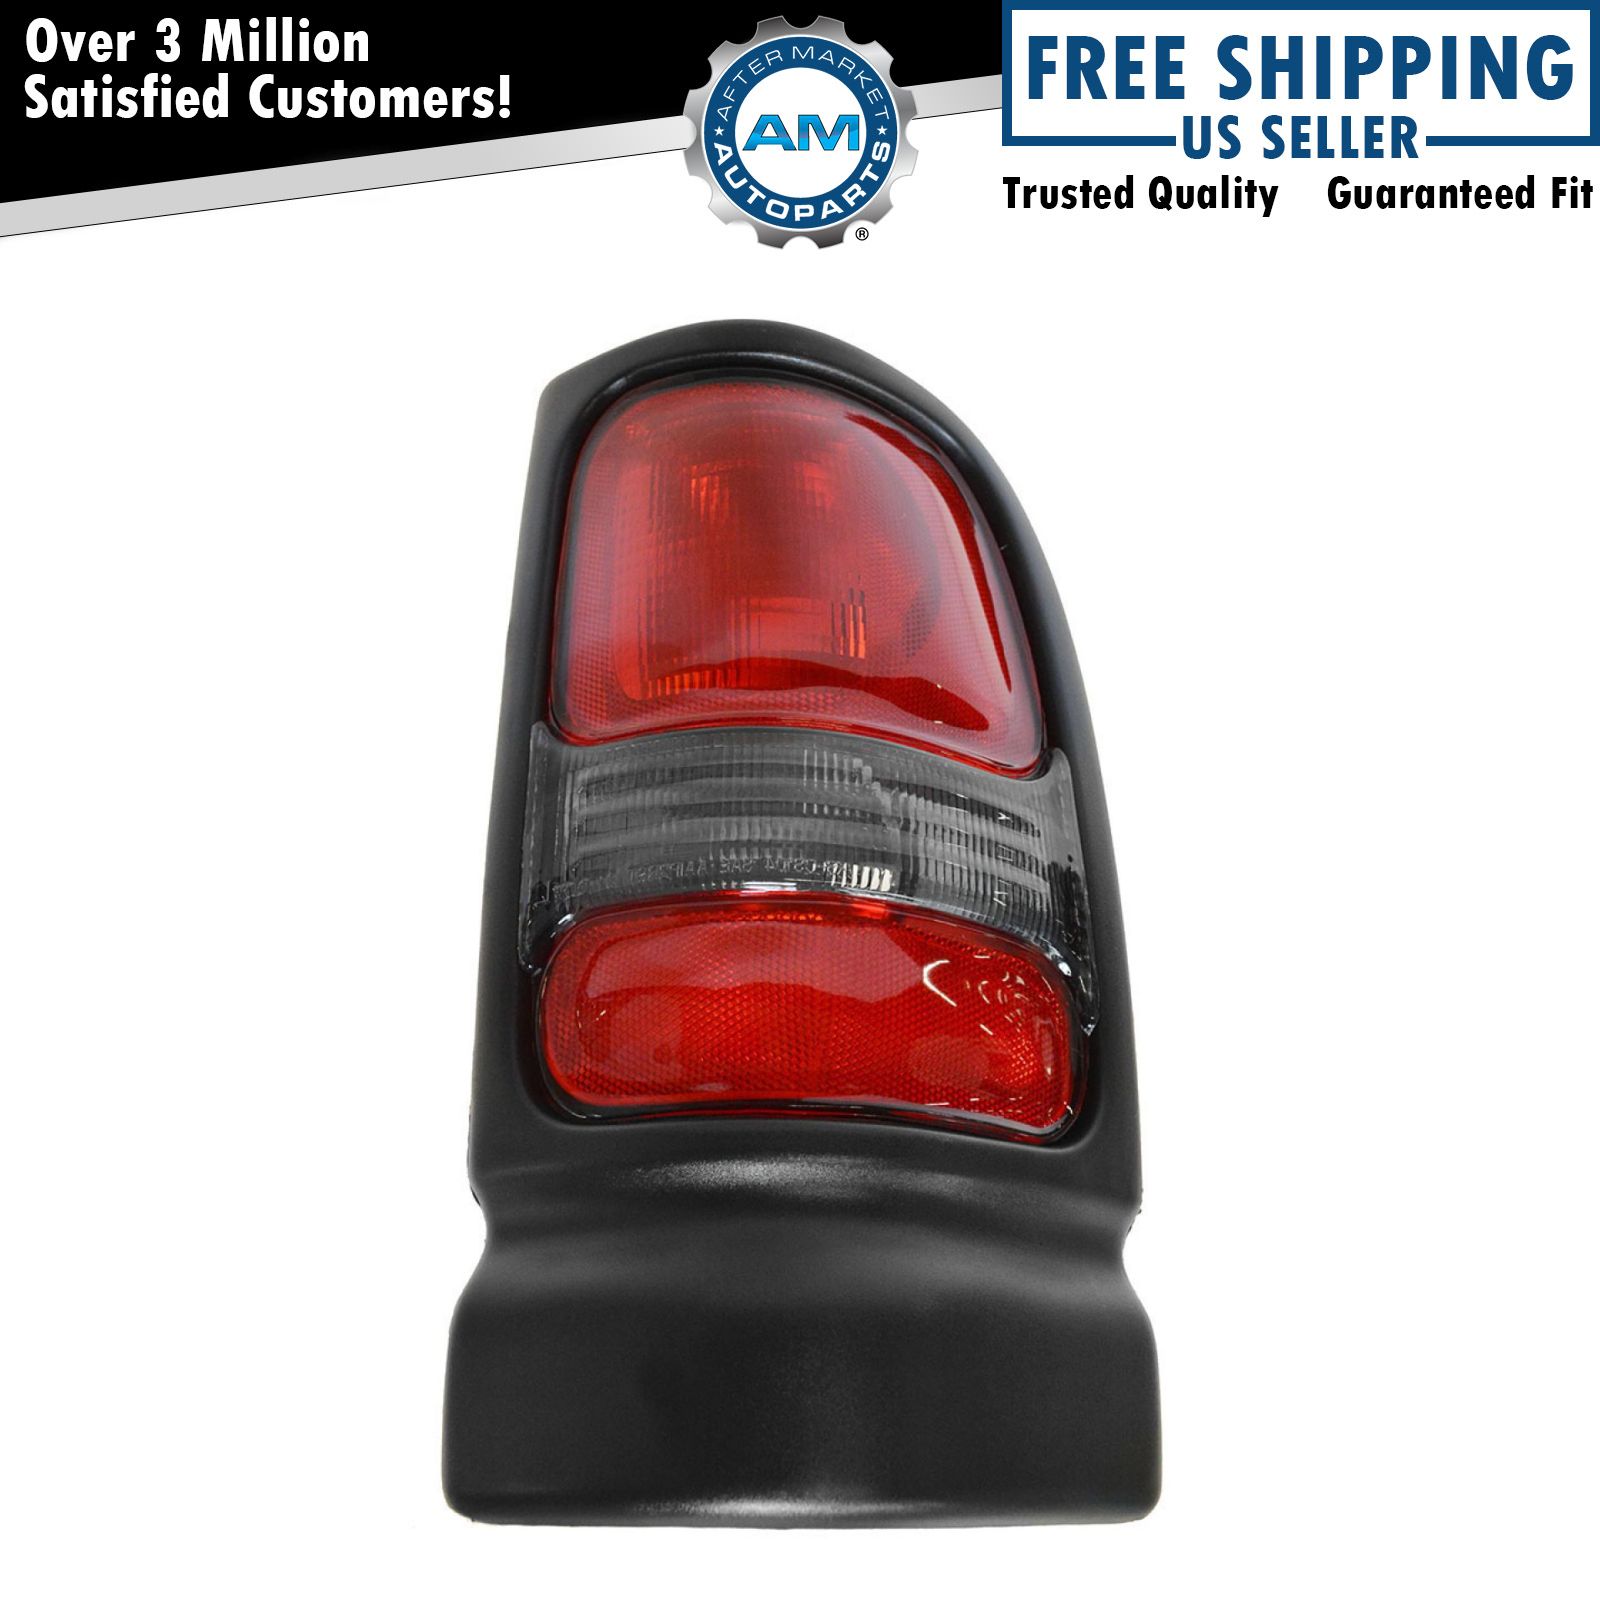 Right Rear Tail Light Assembly Fits 1994-2002 Dodge Ram 1500 2500 3500